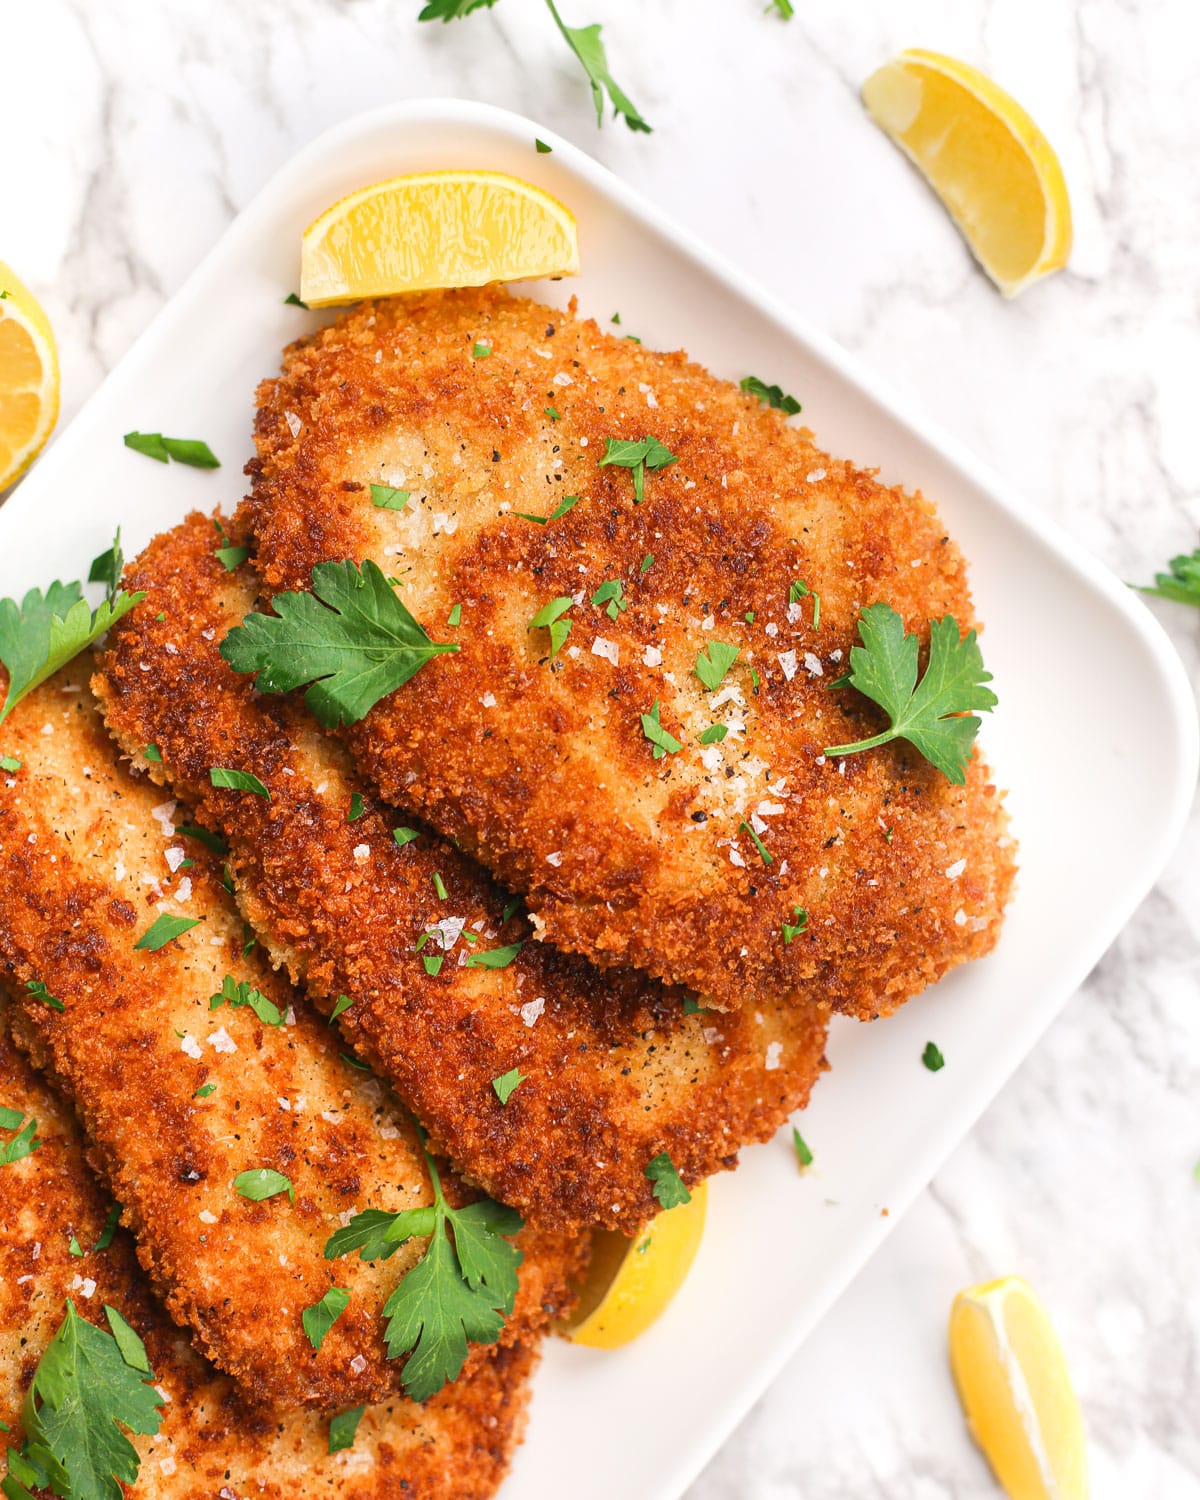 classic pork schnitzels on a plate with lemon wedges and parsley